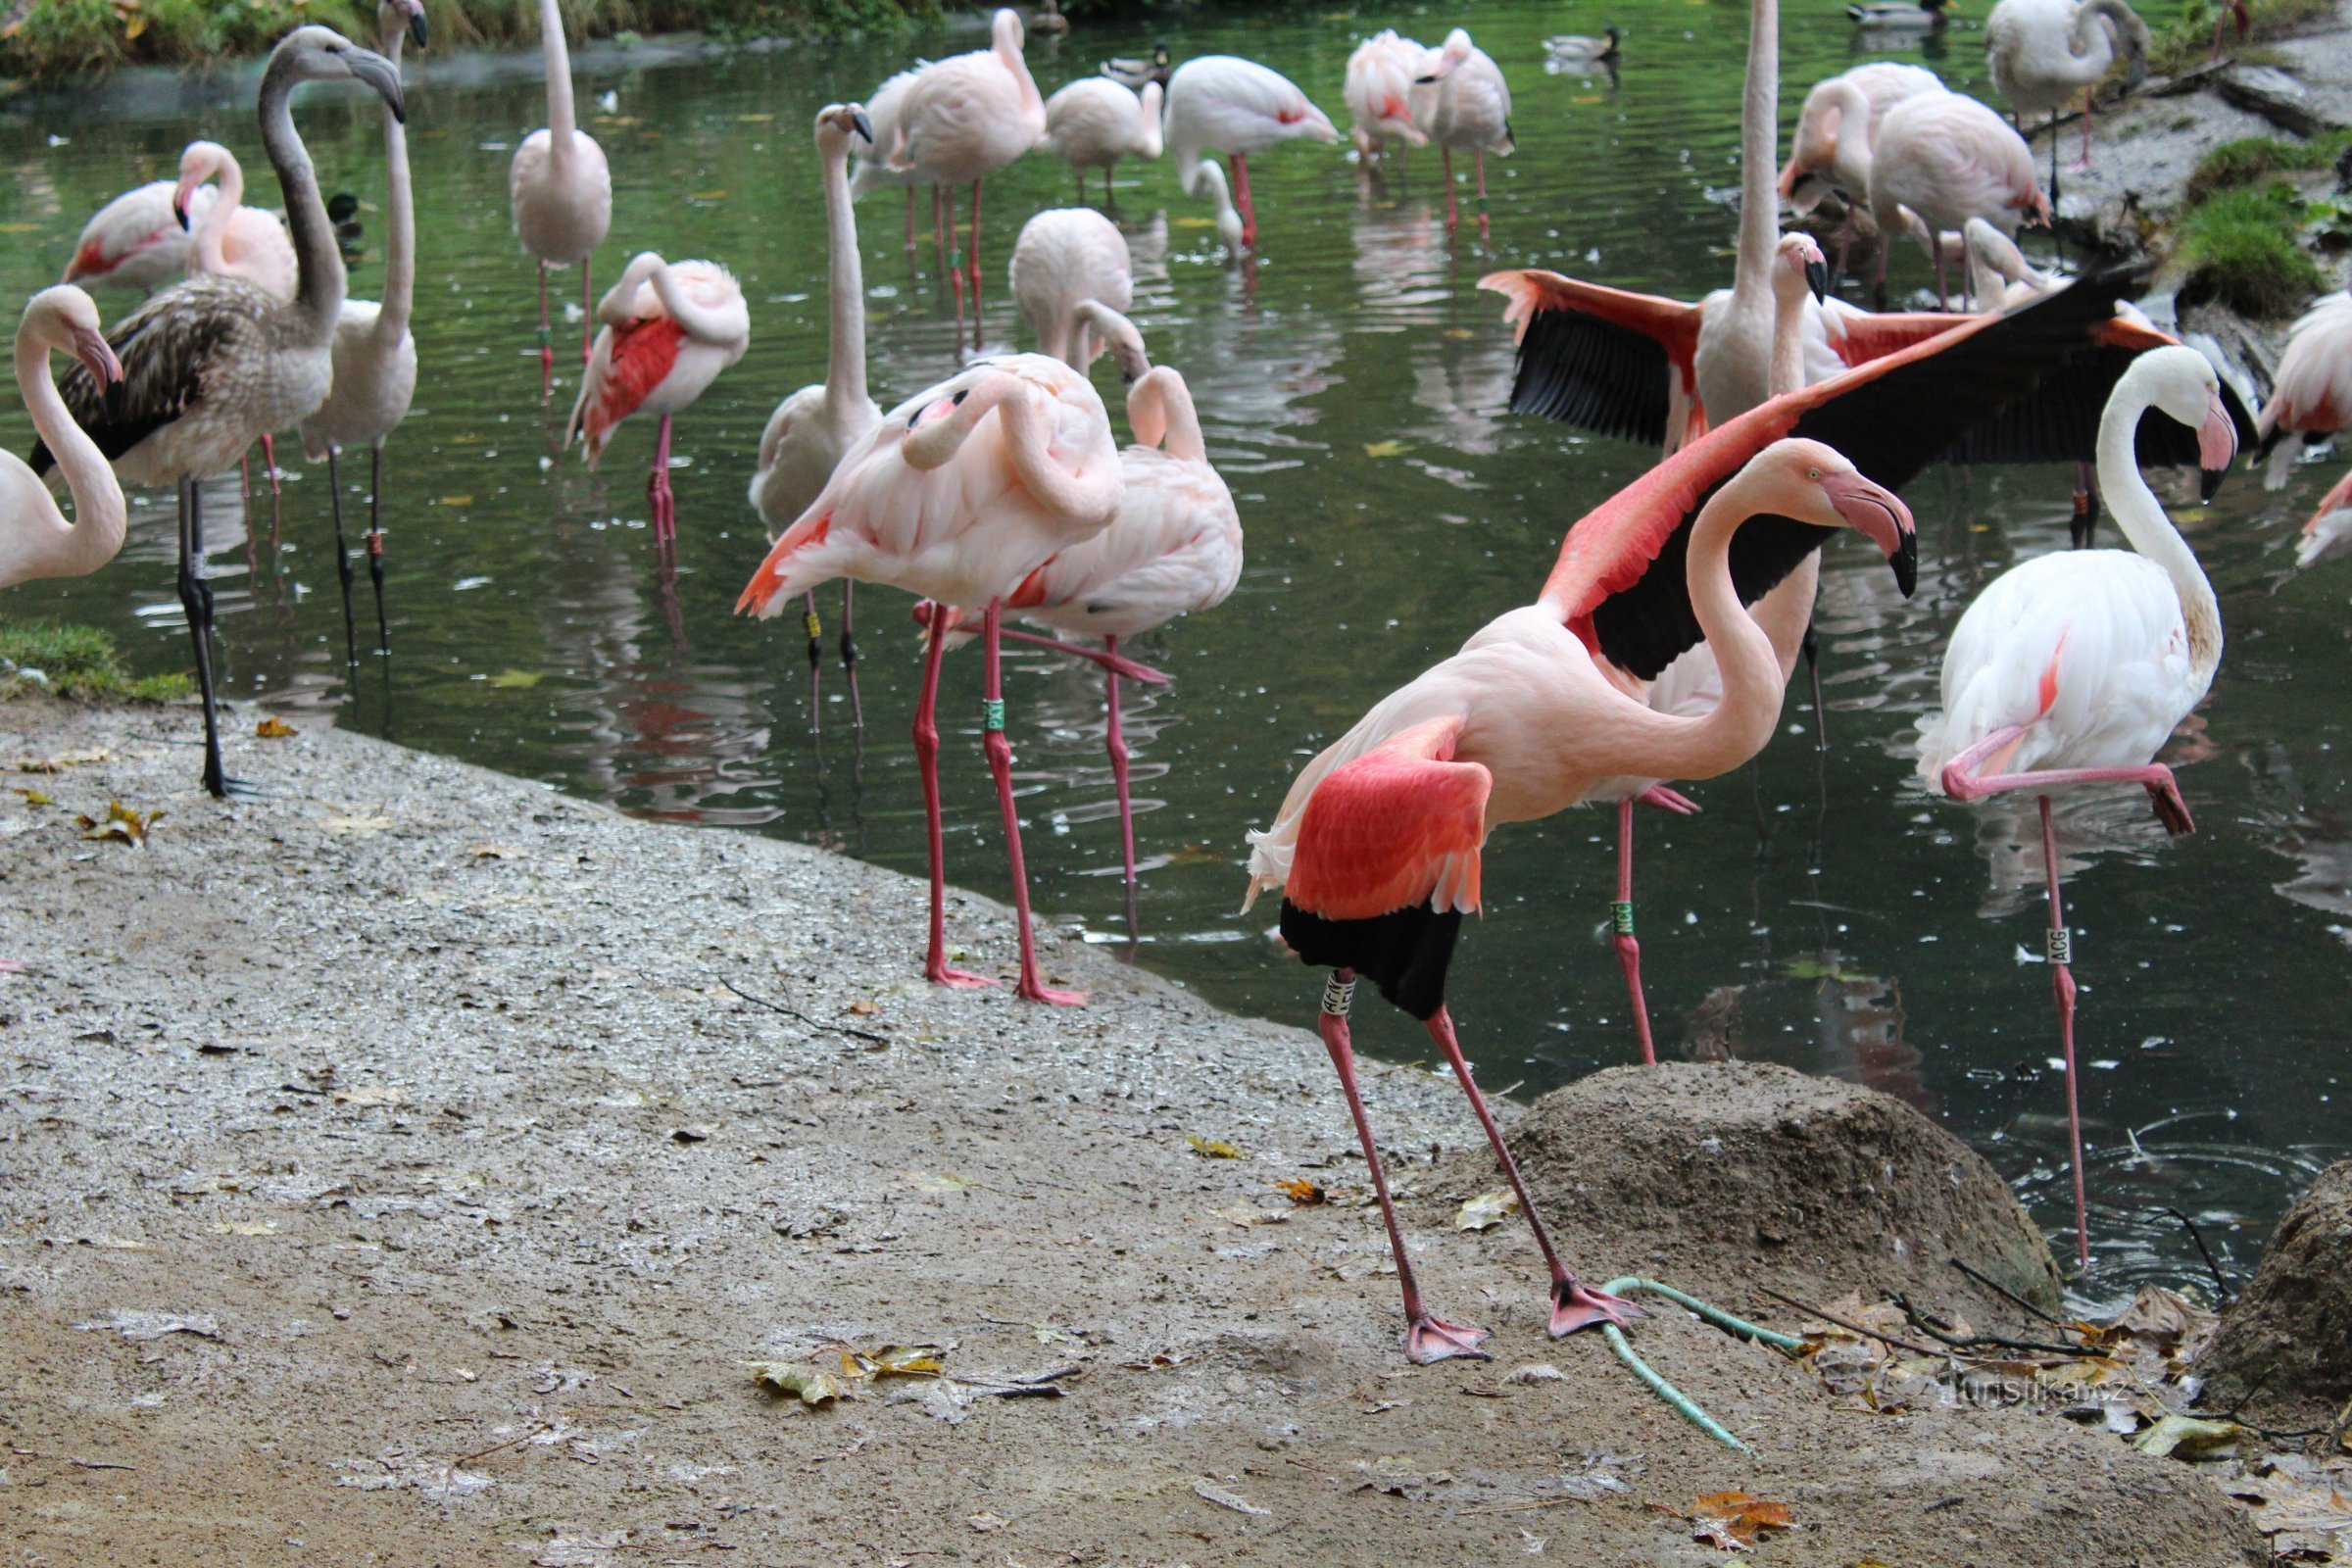 Flamingos - the graceful movements of these feathered animals are soothing.